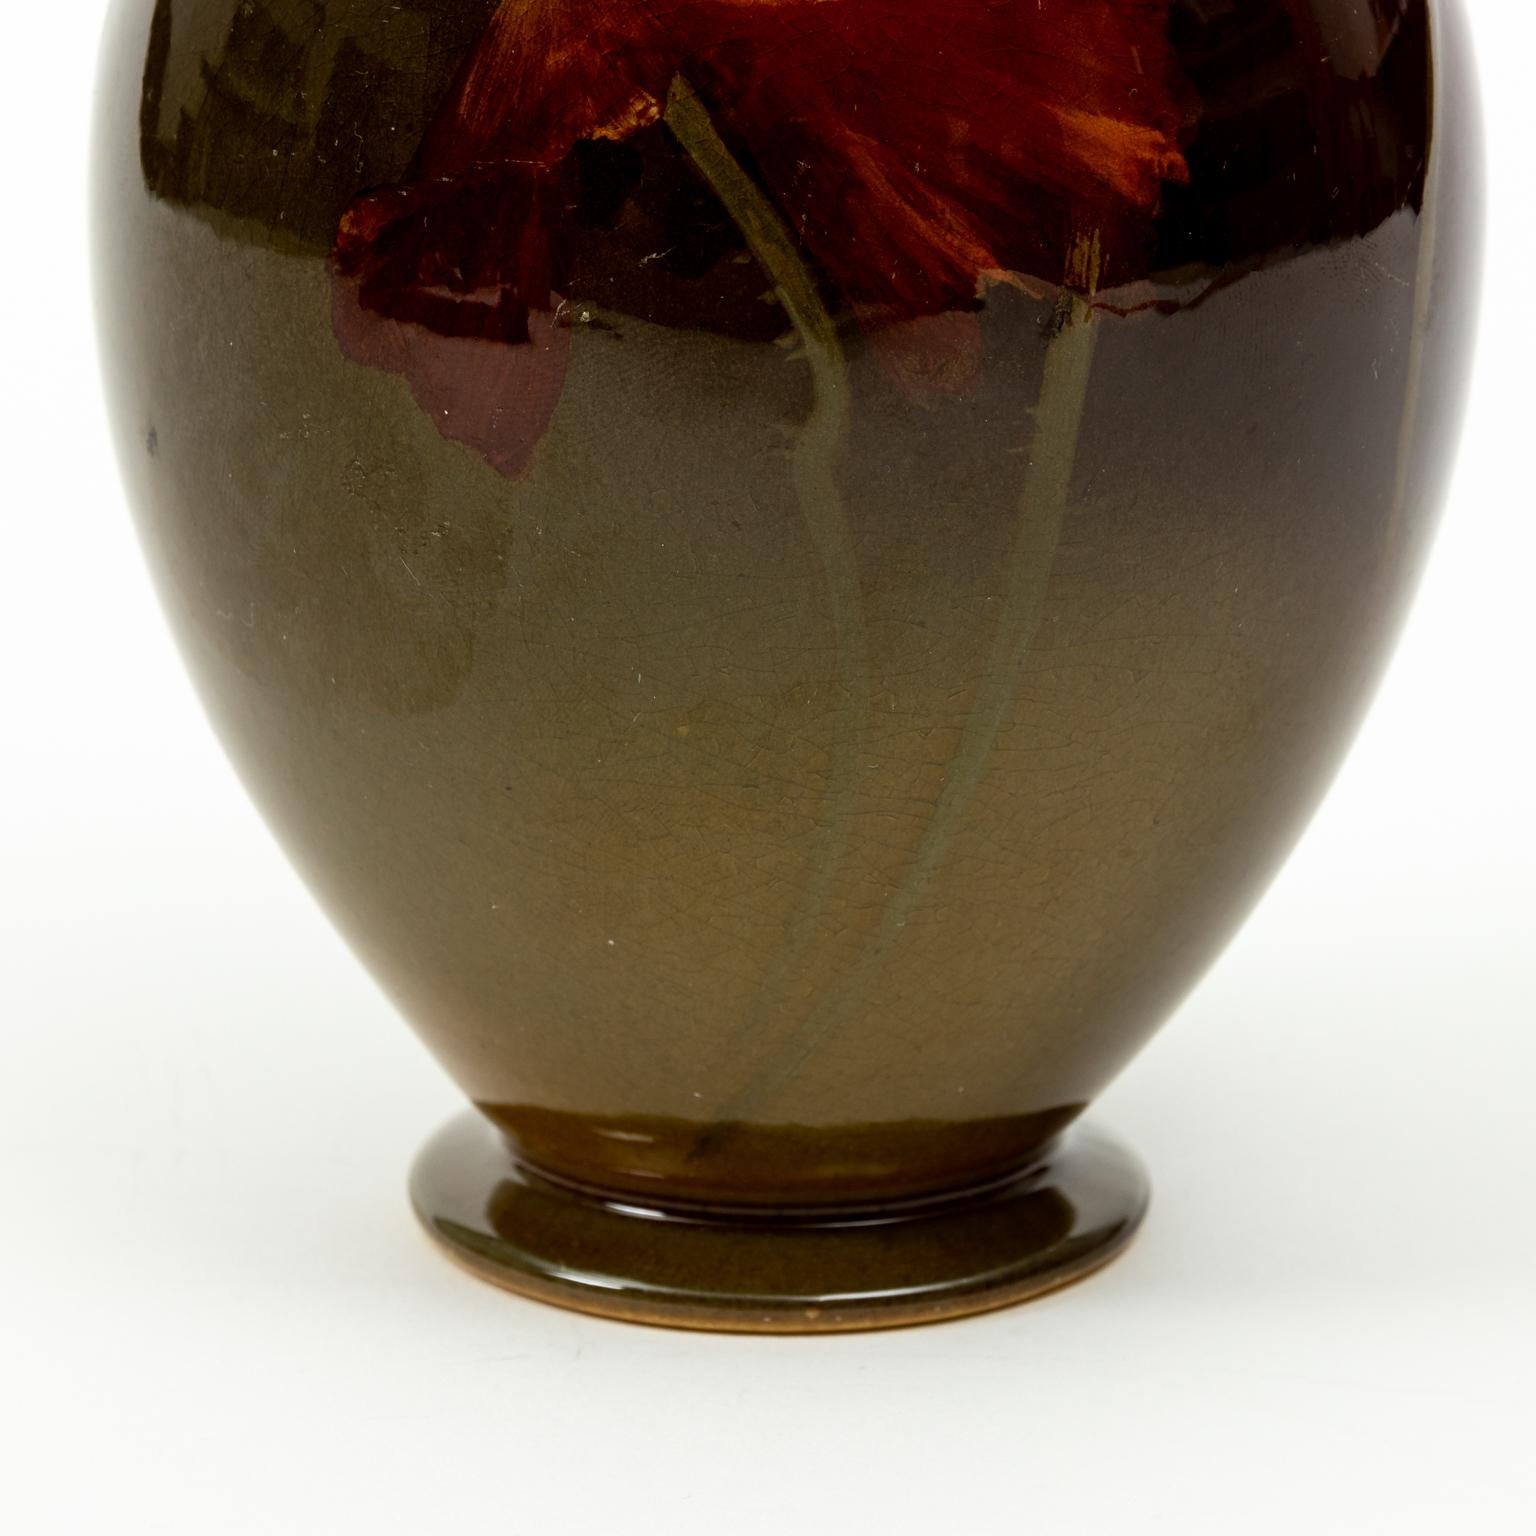 Circa 1901 standard glazed Rookwood vase painted by Irene Bishop in 1901. It depicts a flower and is fully sized. Made in the United States. Please note wear consistent with age.